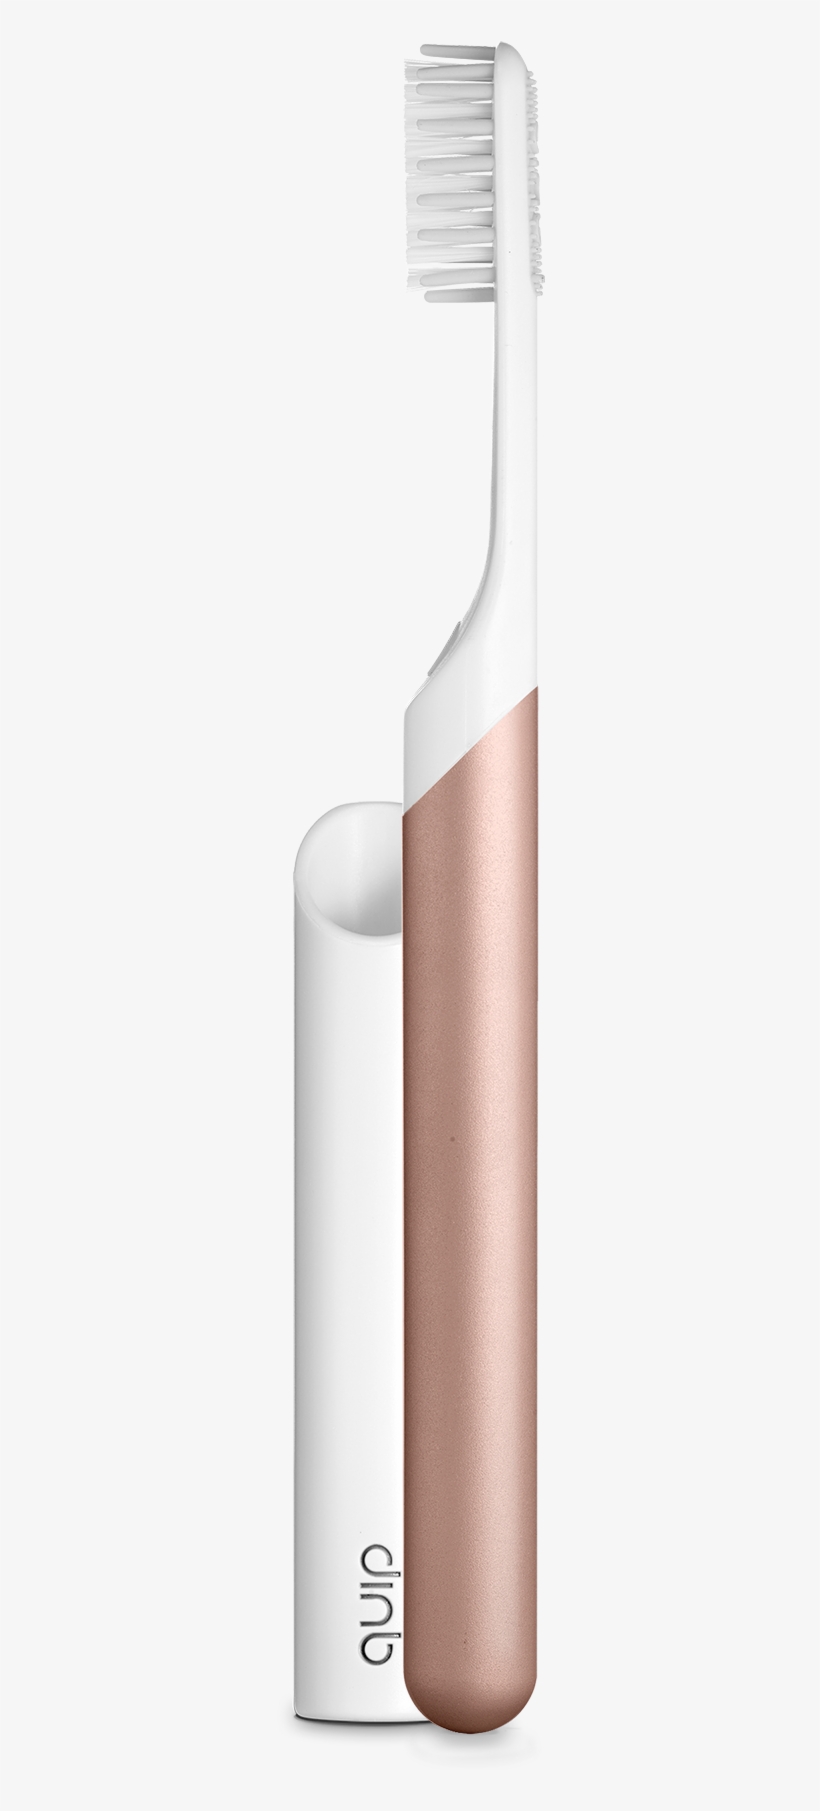 Copper Metal Electric Toothbrush $50 - Mobile Phone, transparent png #9250814